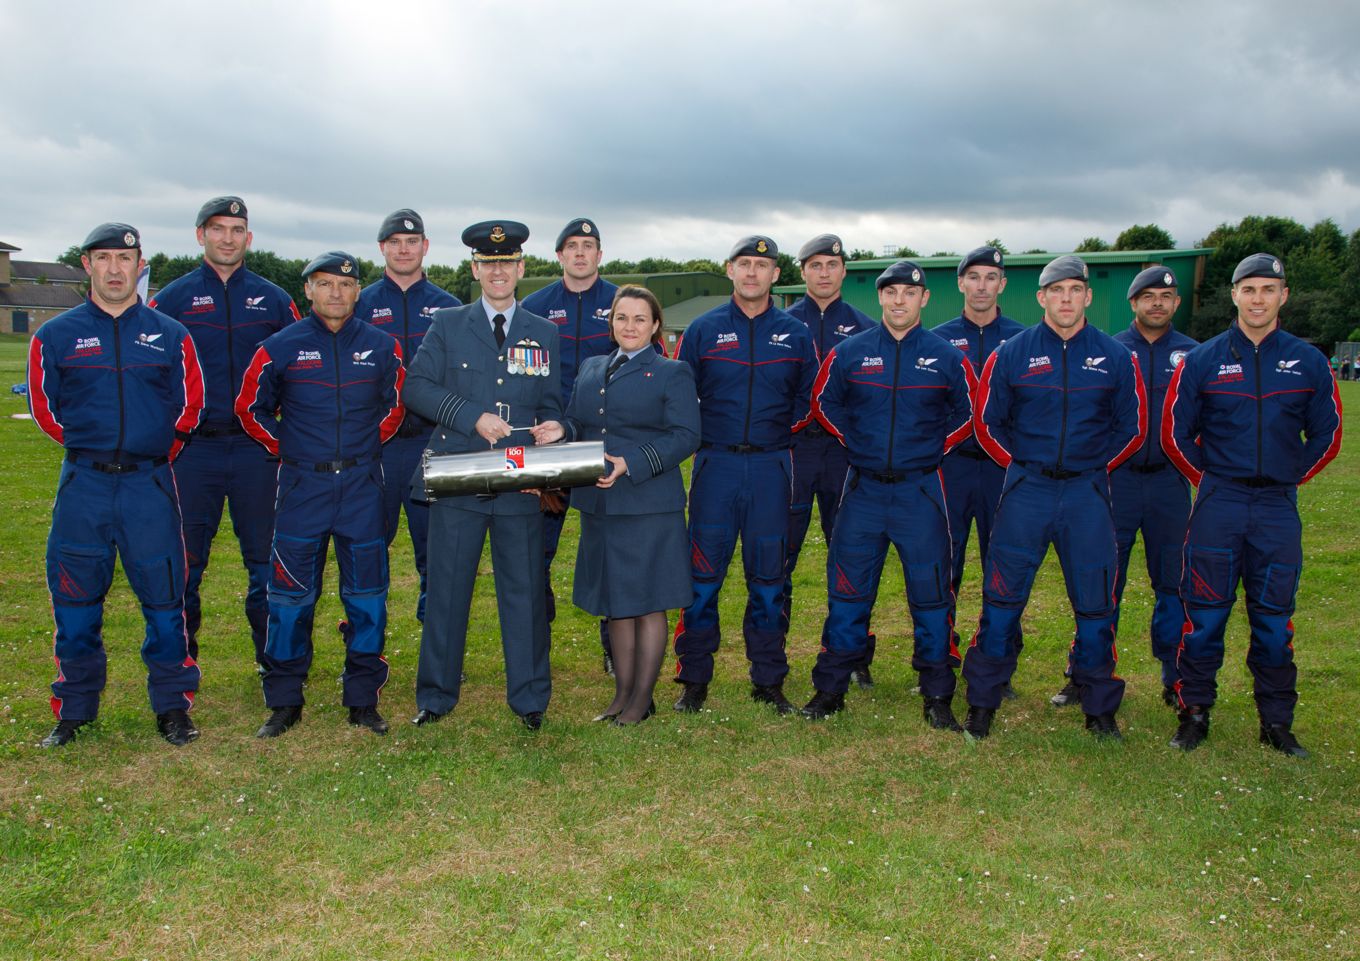 The RAF Falcons celebrate RAF100 at RAF Brize Norton’s Annual Formal Reception where a time capsule was buried to mark 100 years of the Royal Air Force